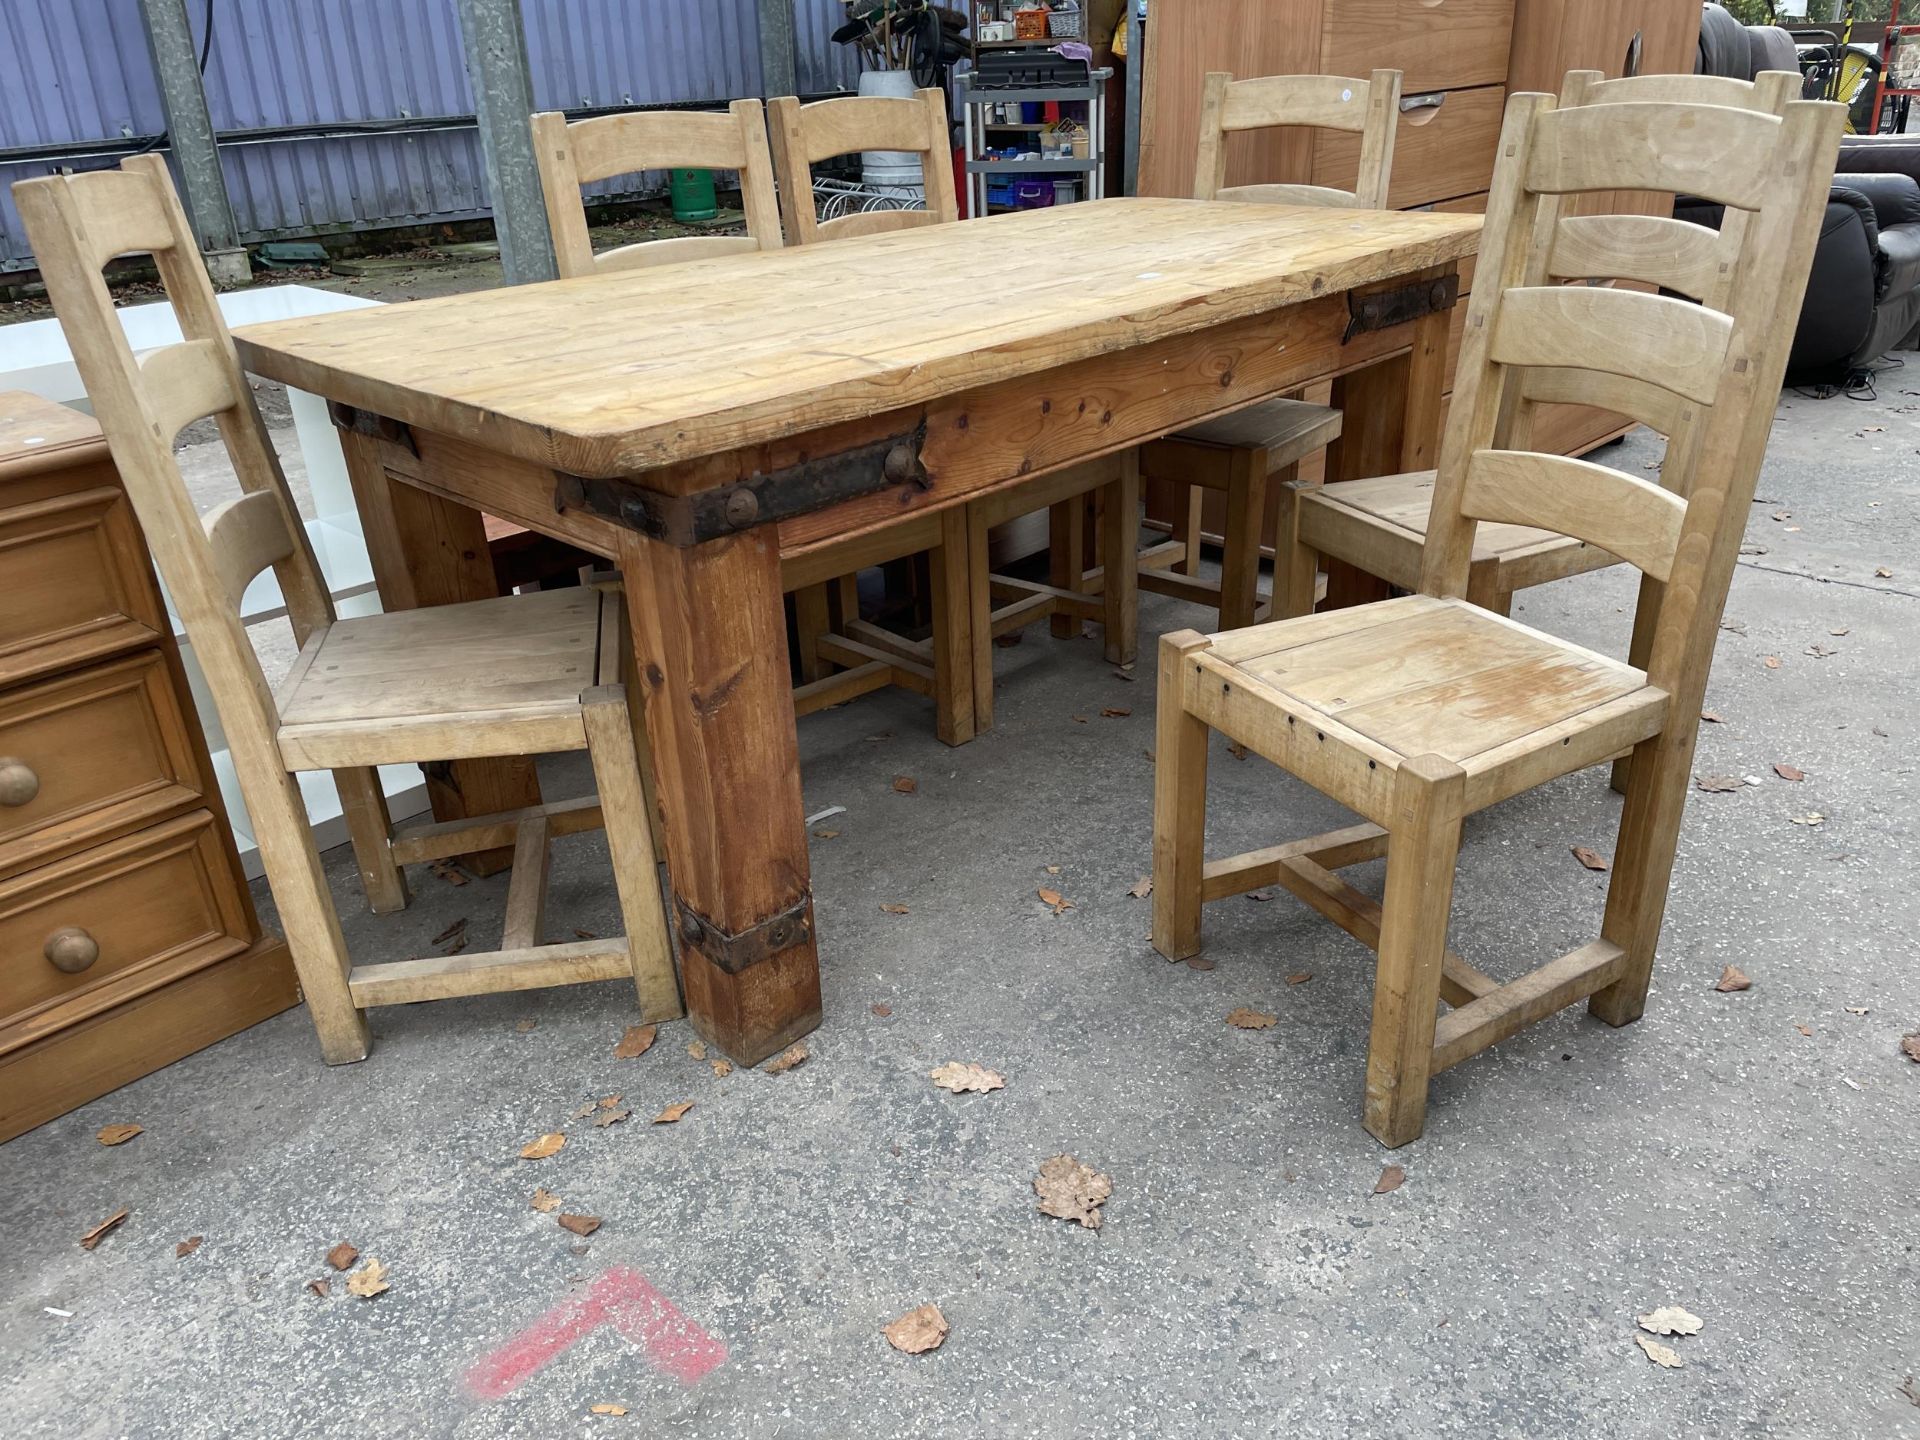 A PINE DINING TABLE, 72 X 35" WITH METAL STRAPS AND SIX CHAIRS - Image 4 of 7